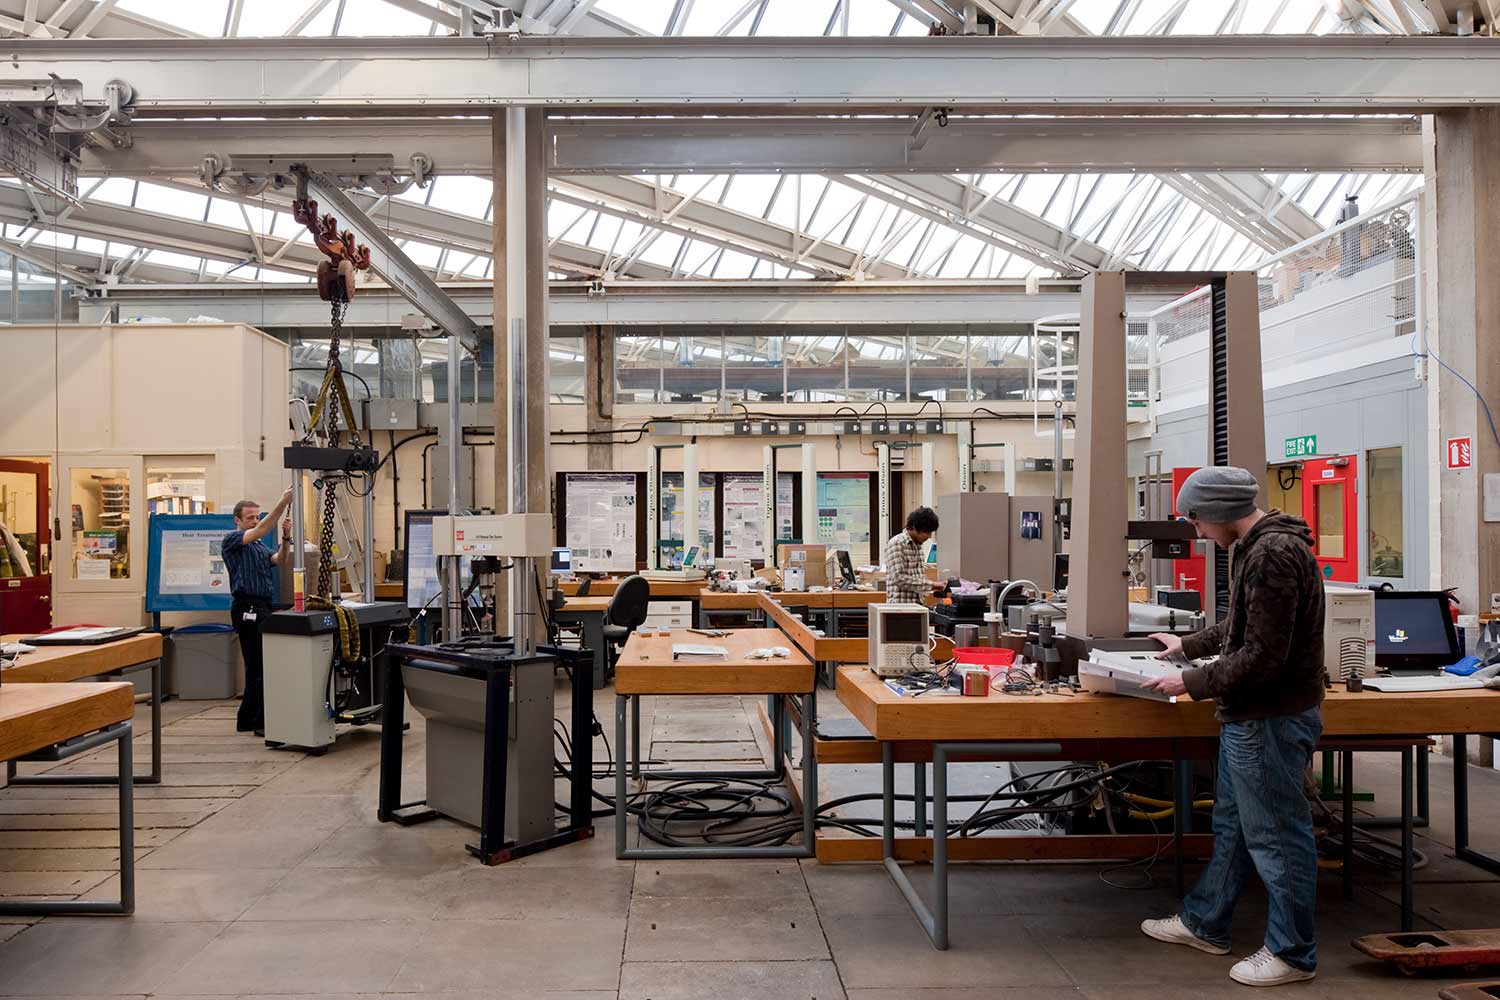 Inside a workshop you can see how the design of the roof windows bring in the light - University of Leicester